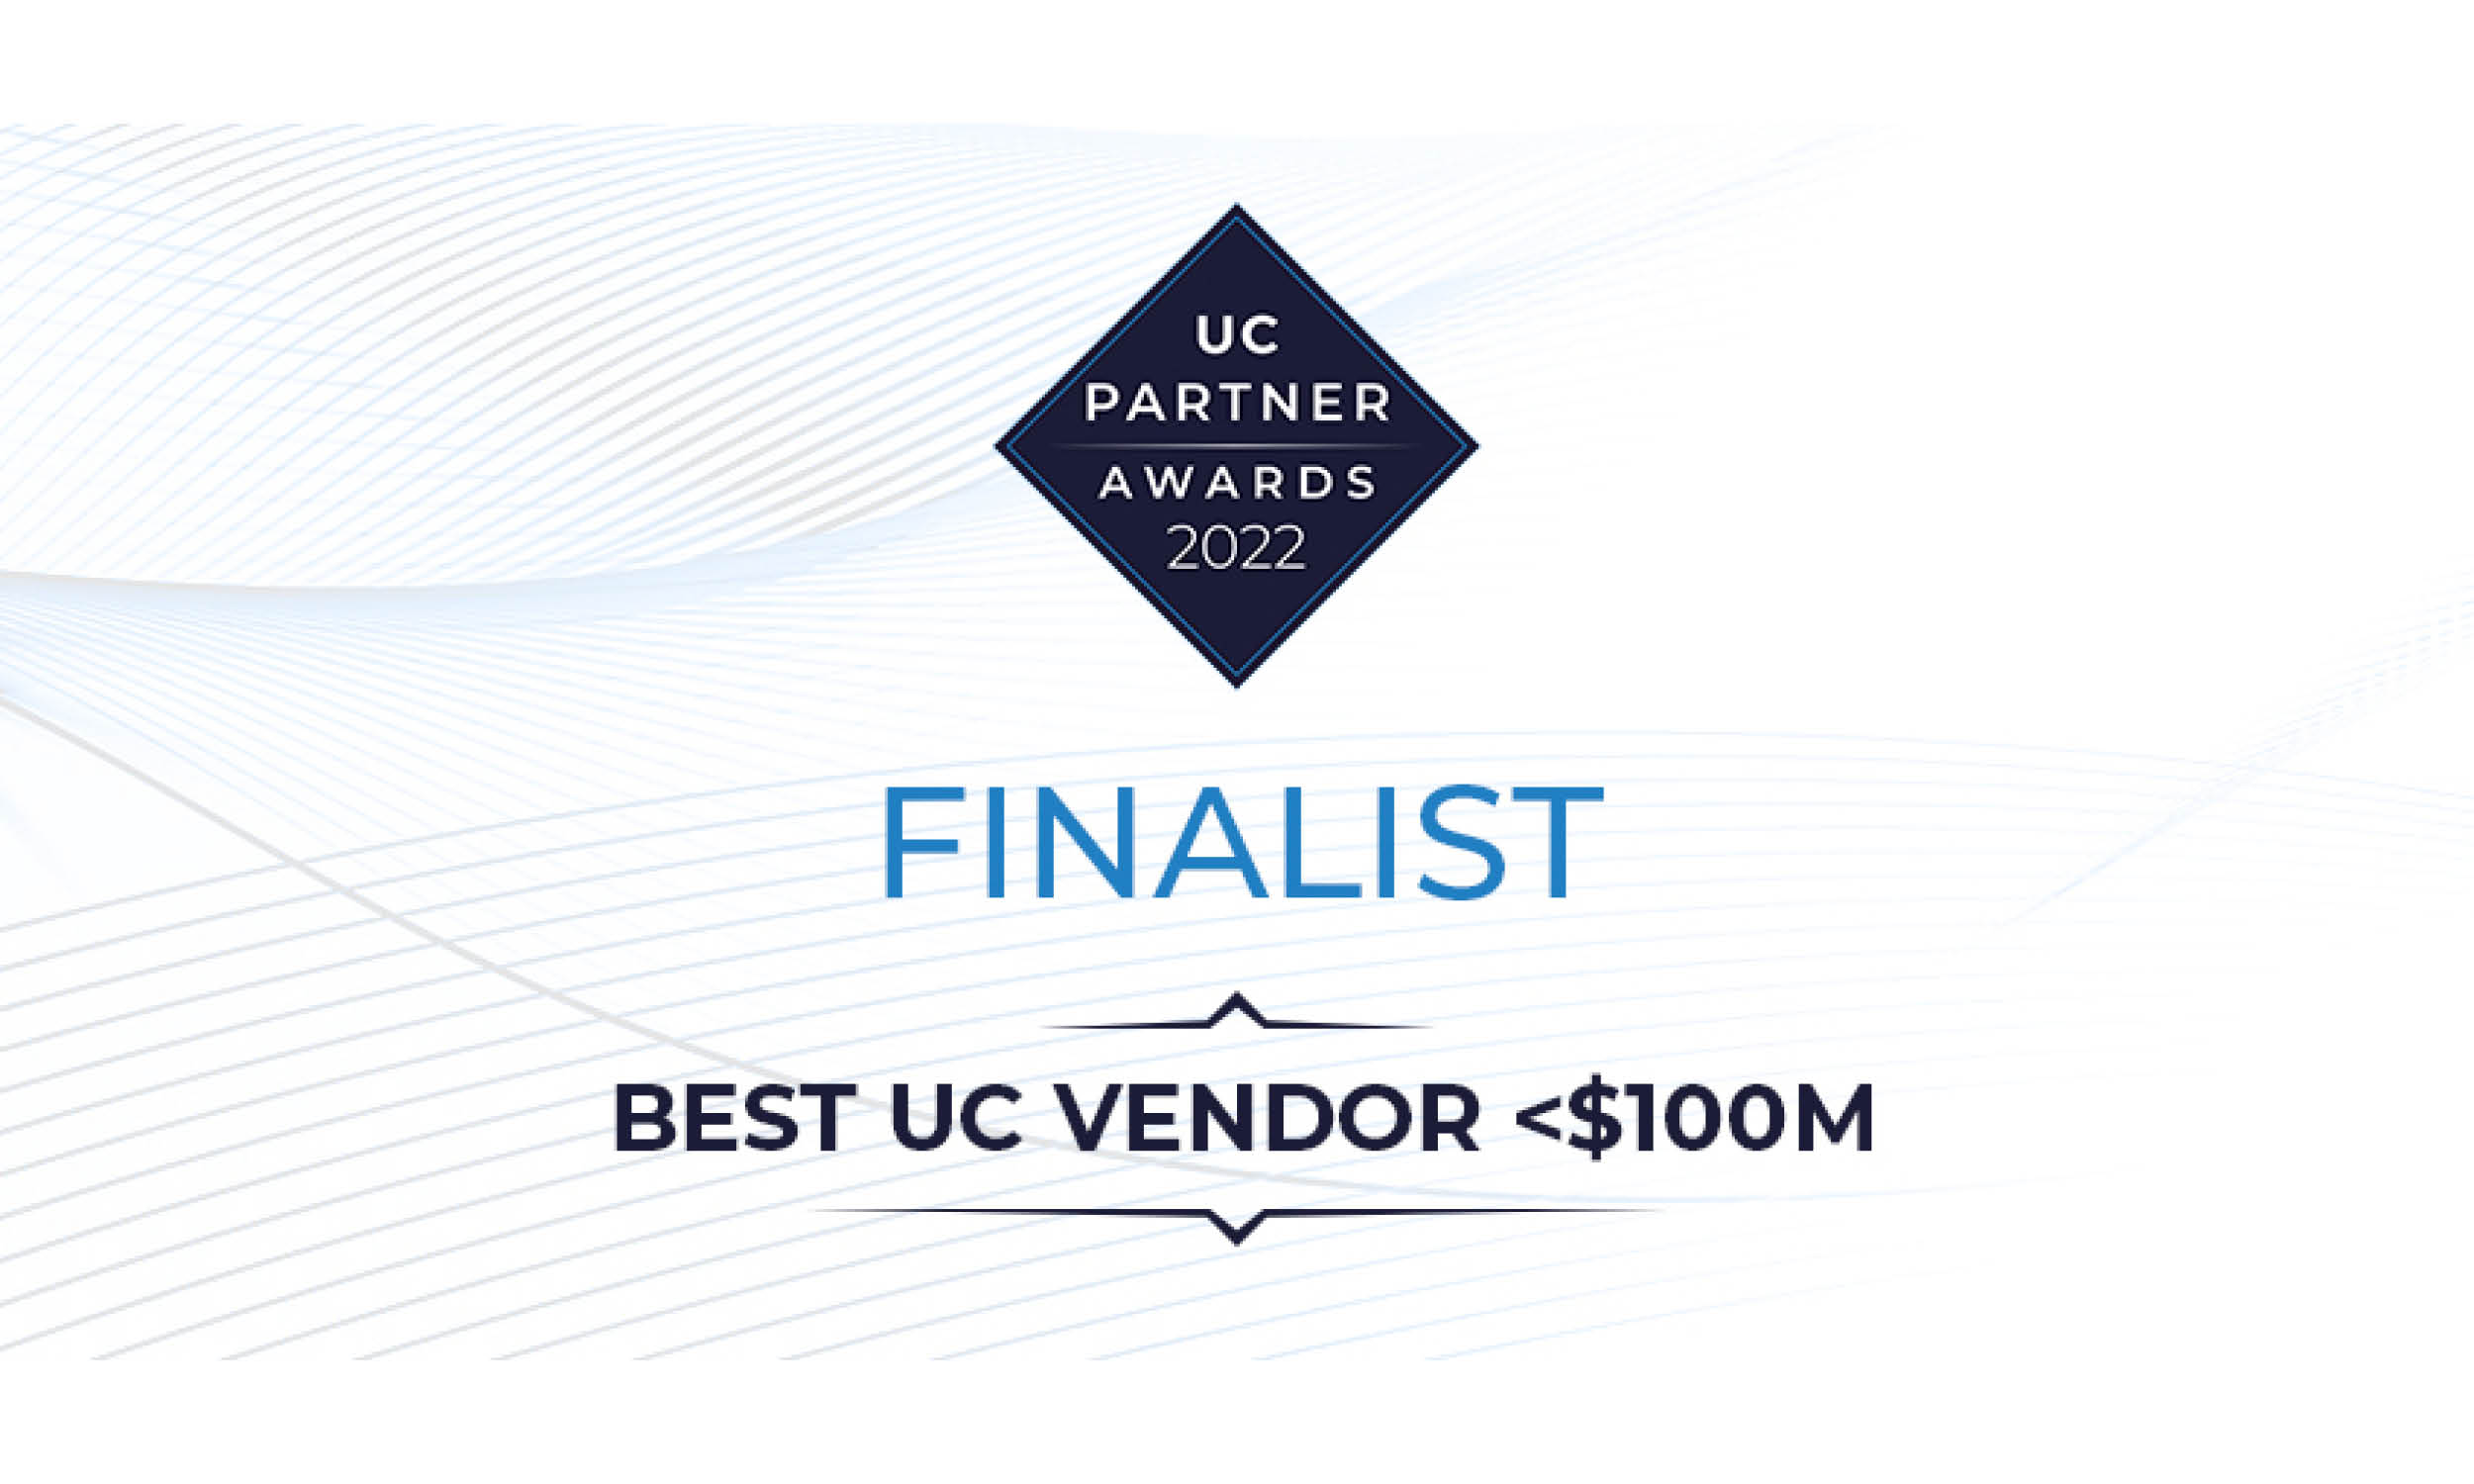 Kakapo Systems shortlisted to win Best UC Vendor at Uc Partner Awards 2022